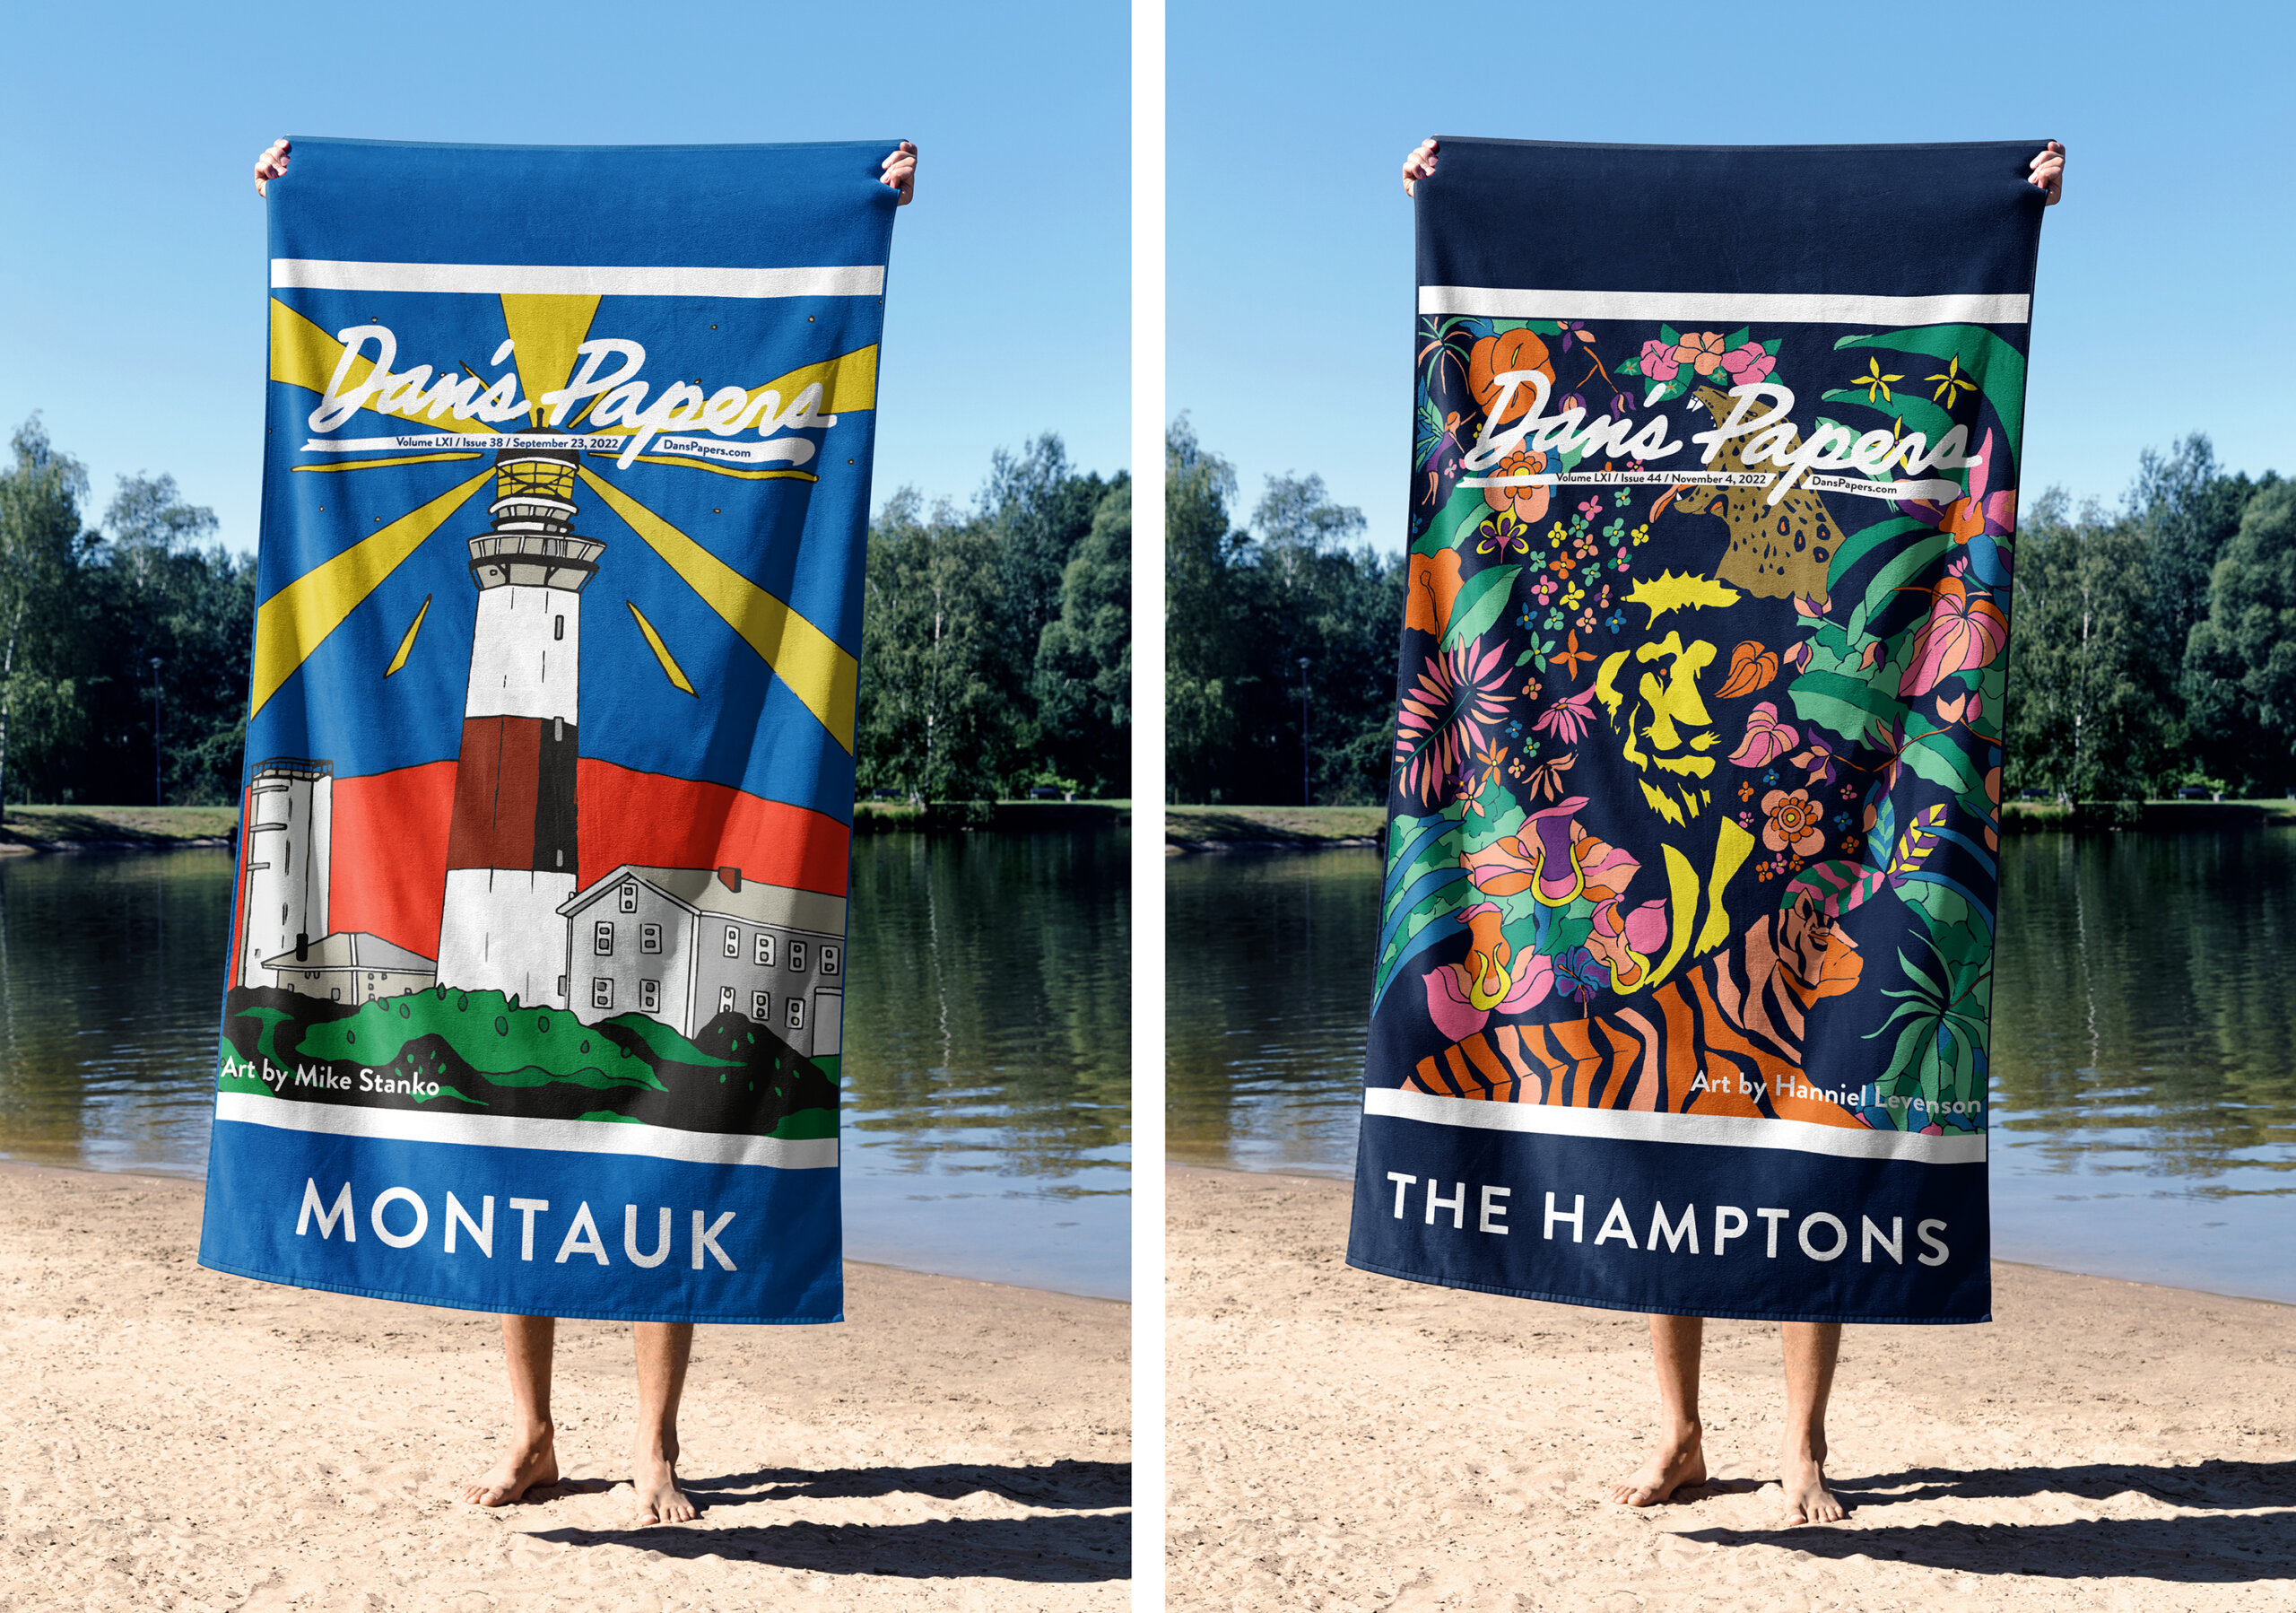 Dan's Papers beach towels featuring Montauk and Hamptons cover art by Mike Stanko and Hanniel Levenson